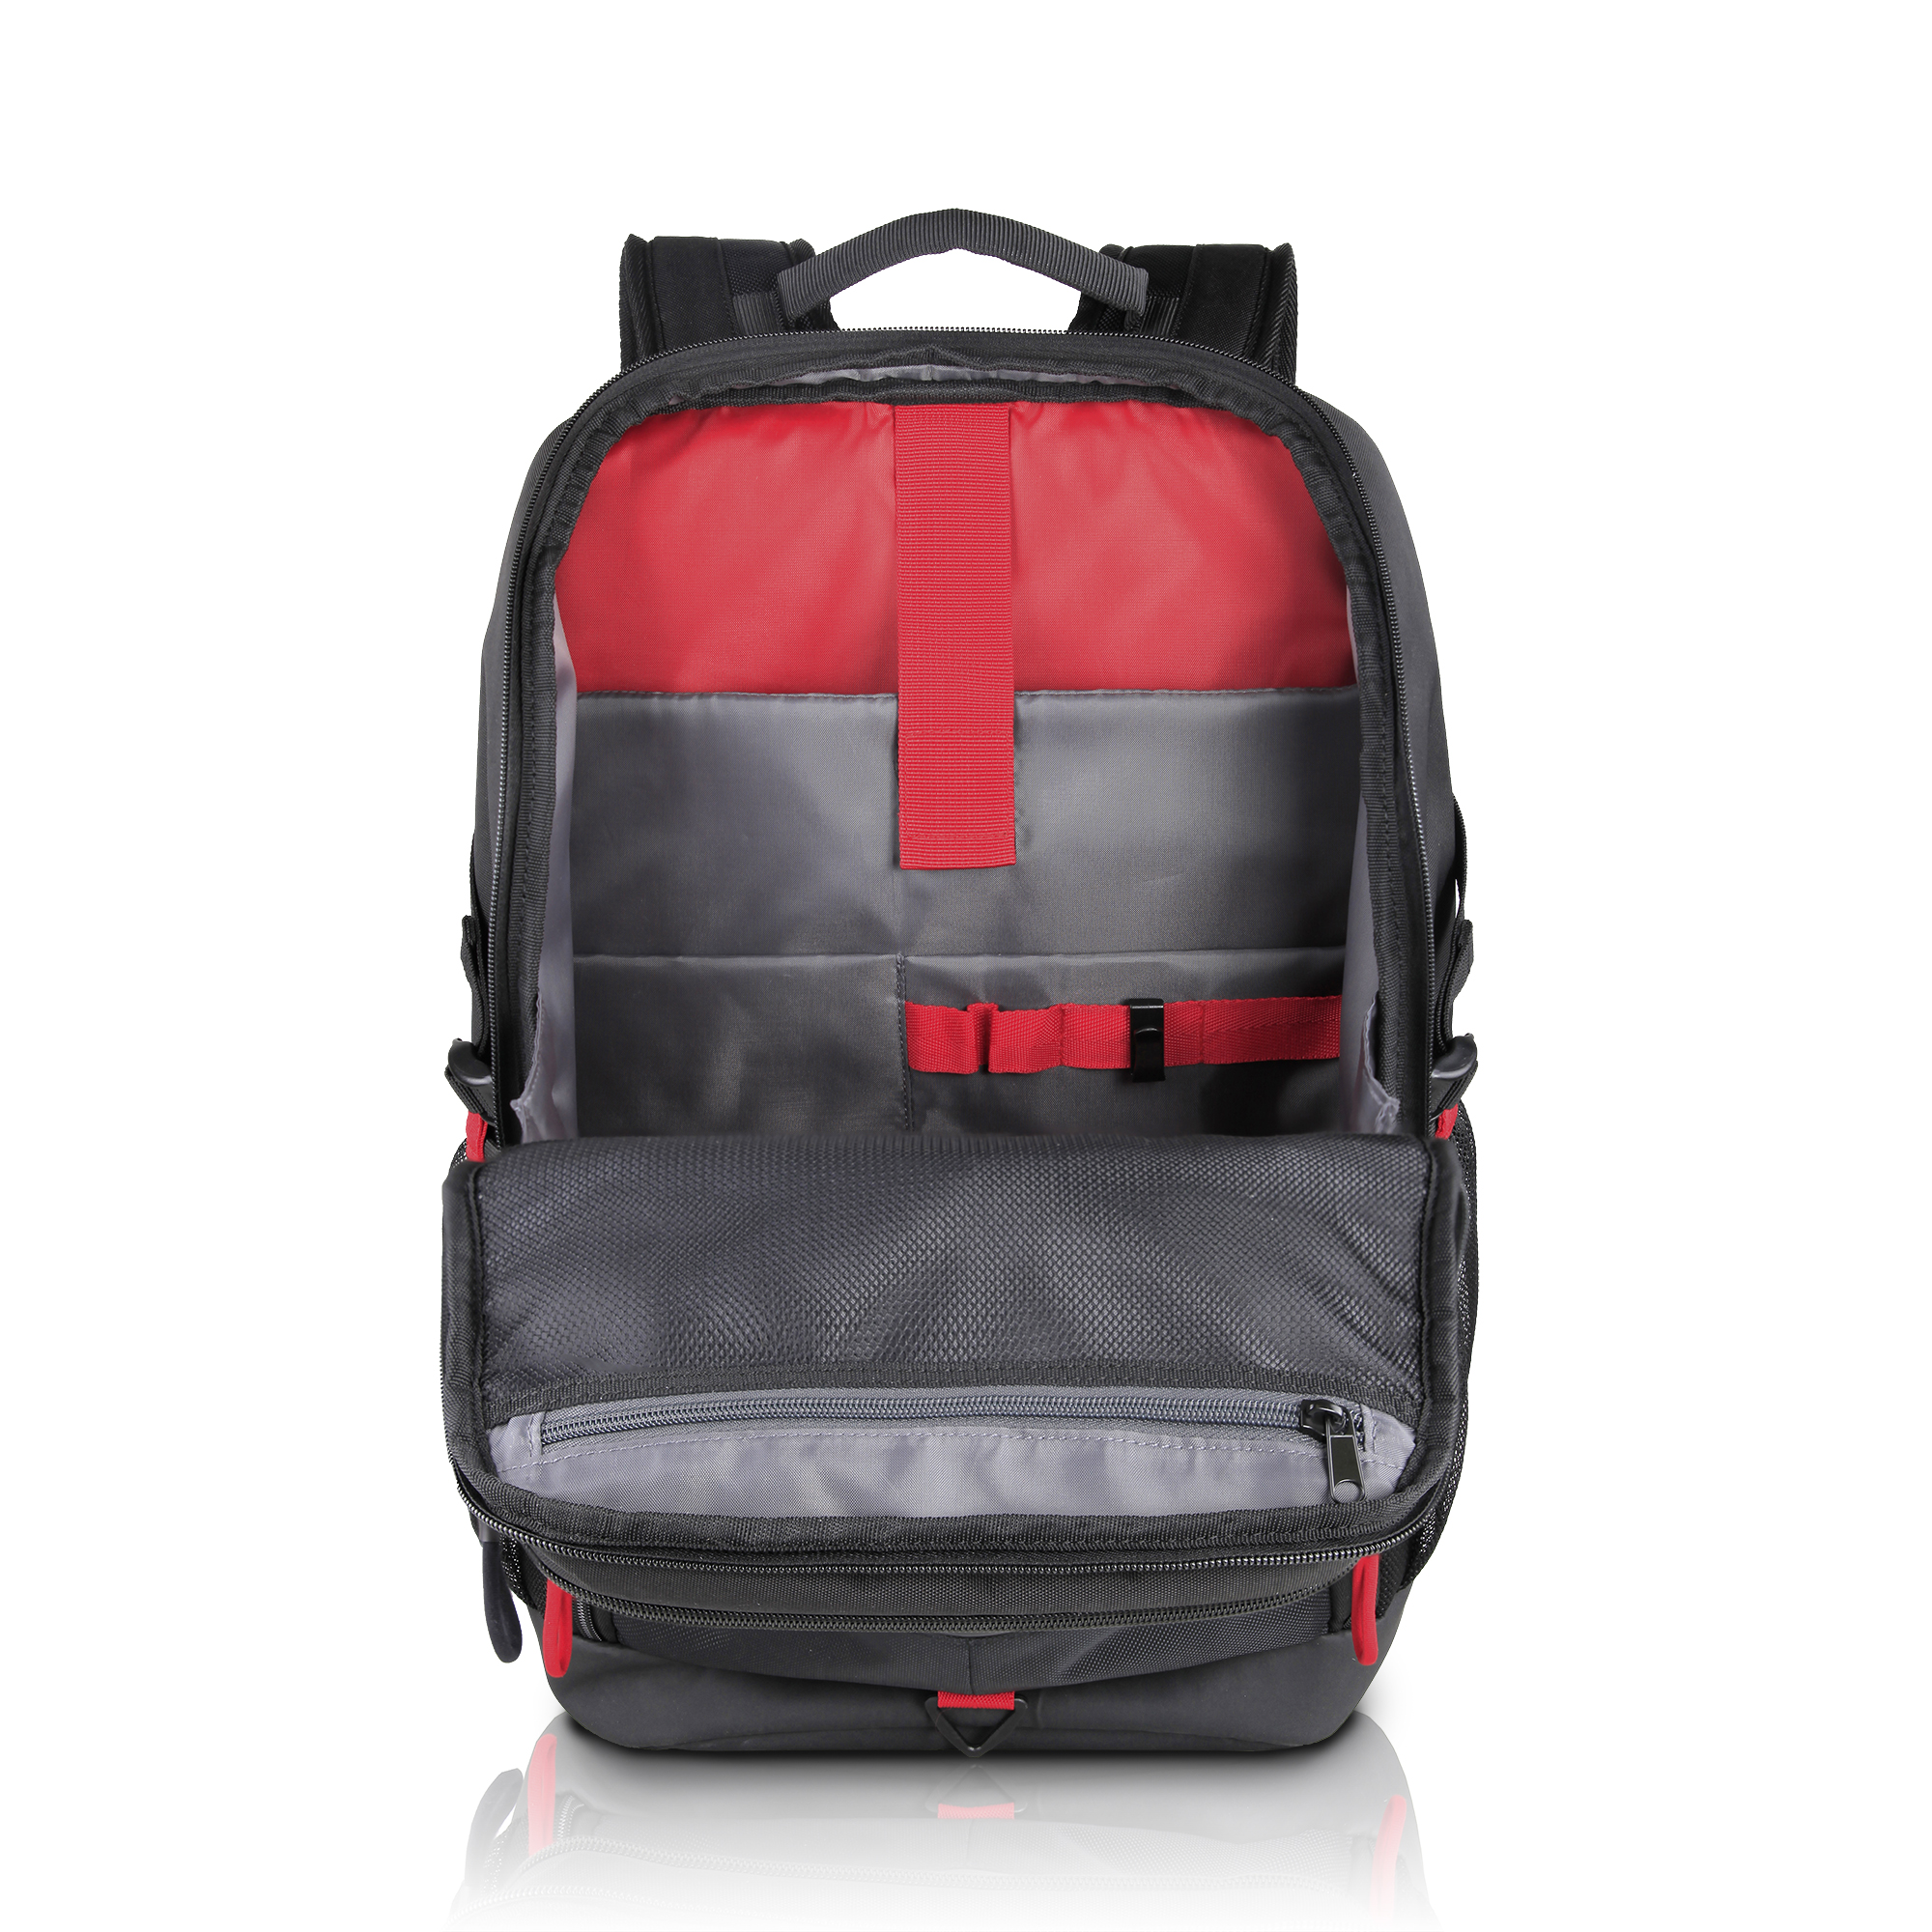 Dell 15" Gaming Backpack - 50KD6 - image 5 of 5